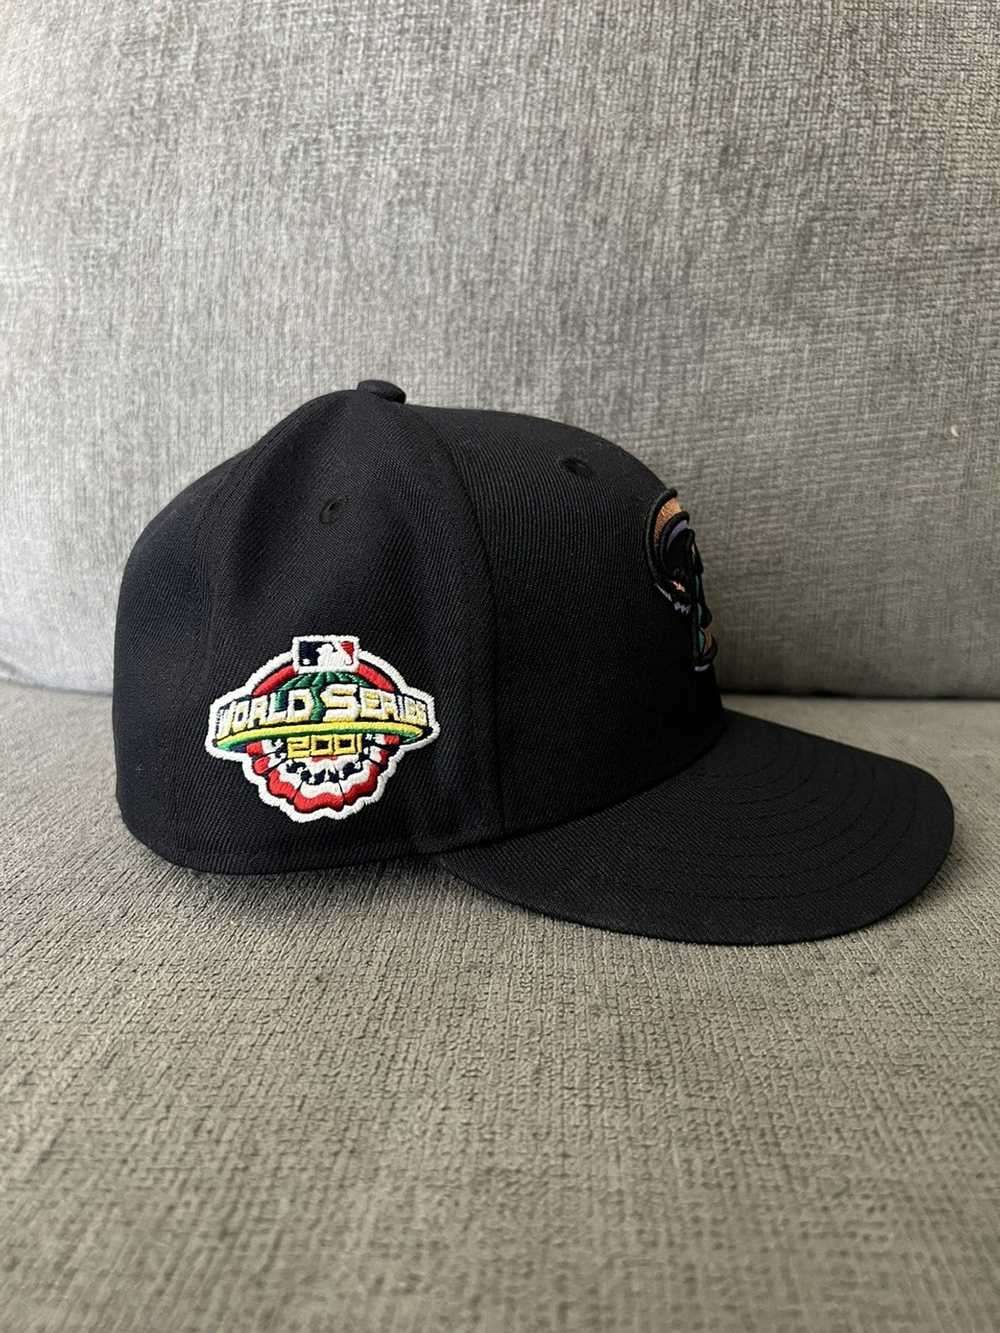 Hat Club Exclusive Manolo Red Clay Atlanta Braves 1999 World Series Pa –  Rebeaters